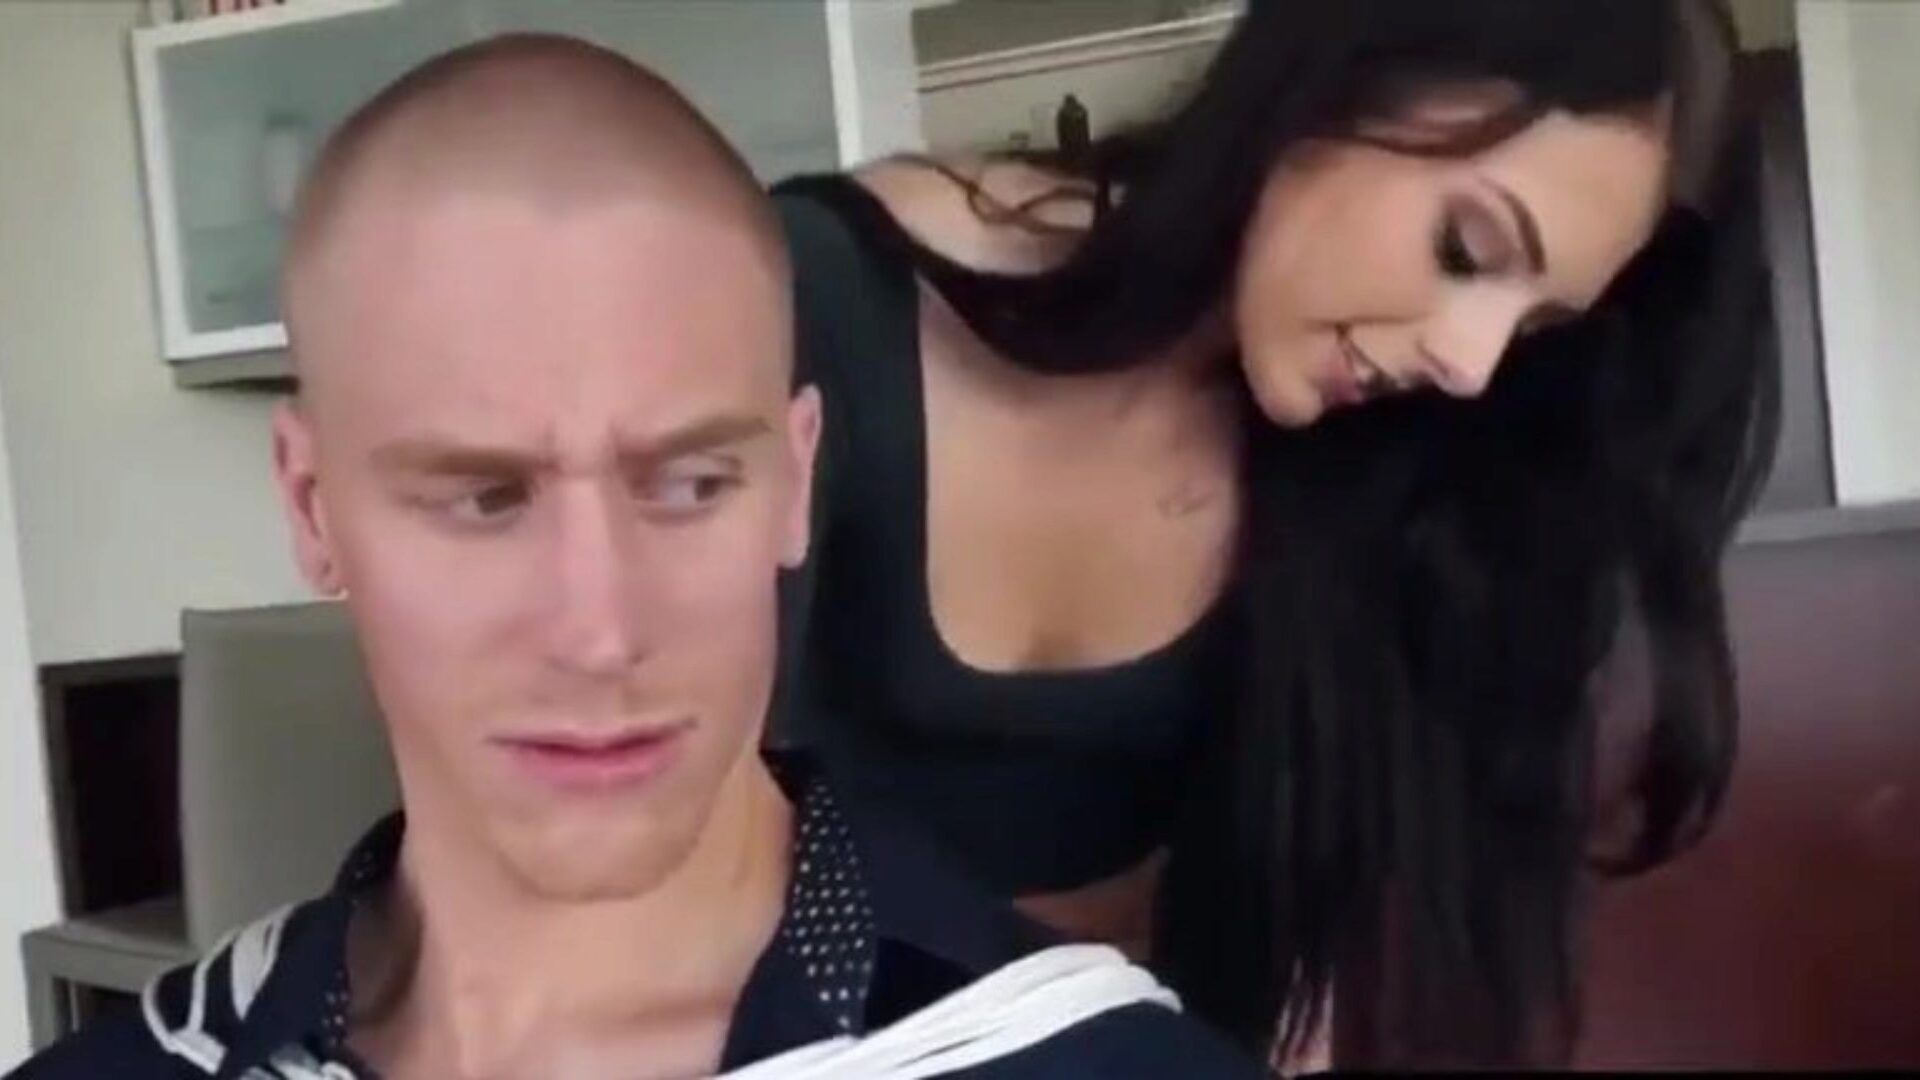 Bros wife is a femdom bitch and I enjoy when this playgirl uses me My bros new dark dark-skinned wife is a female dominance slut but this boy dont like servitude and stuff so that chick usually comes to me and I enjoy when that babe uses me